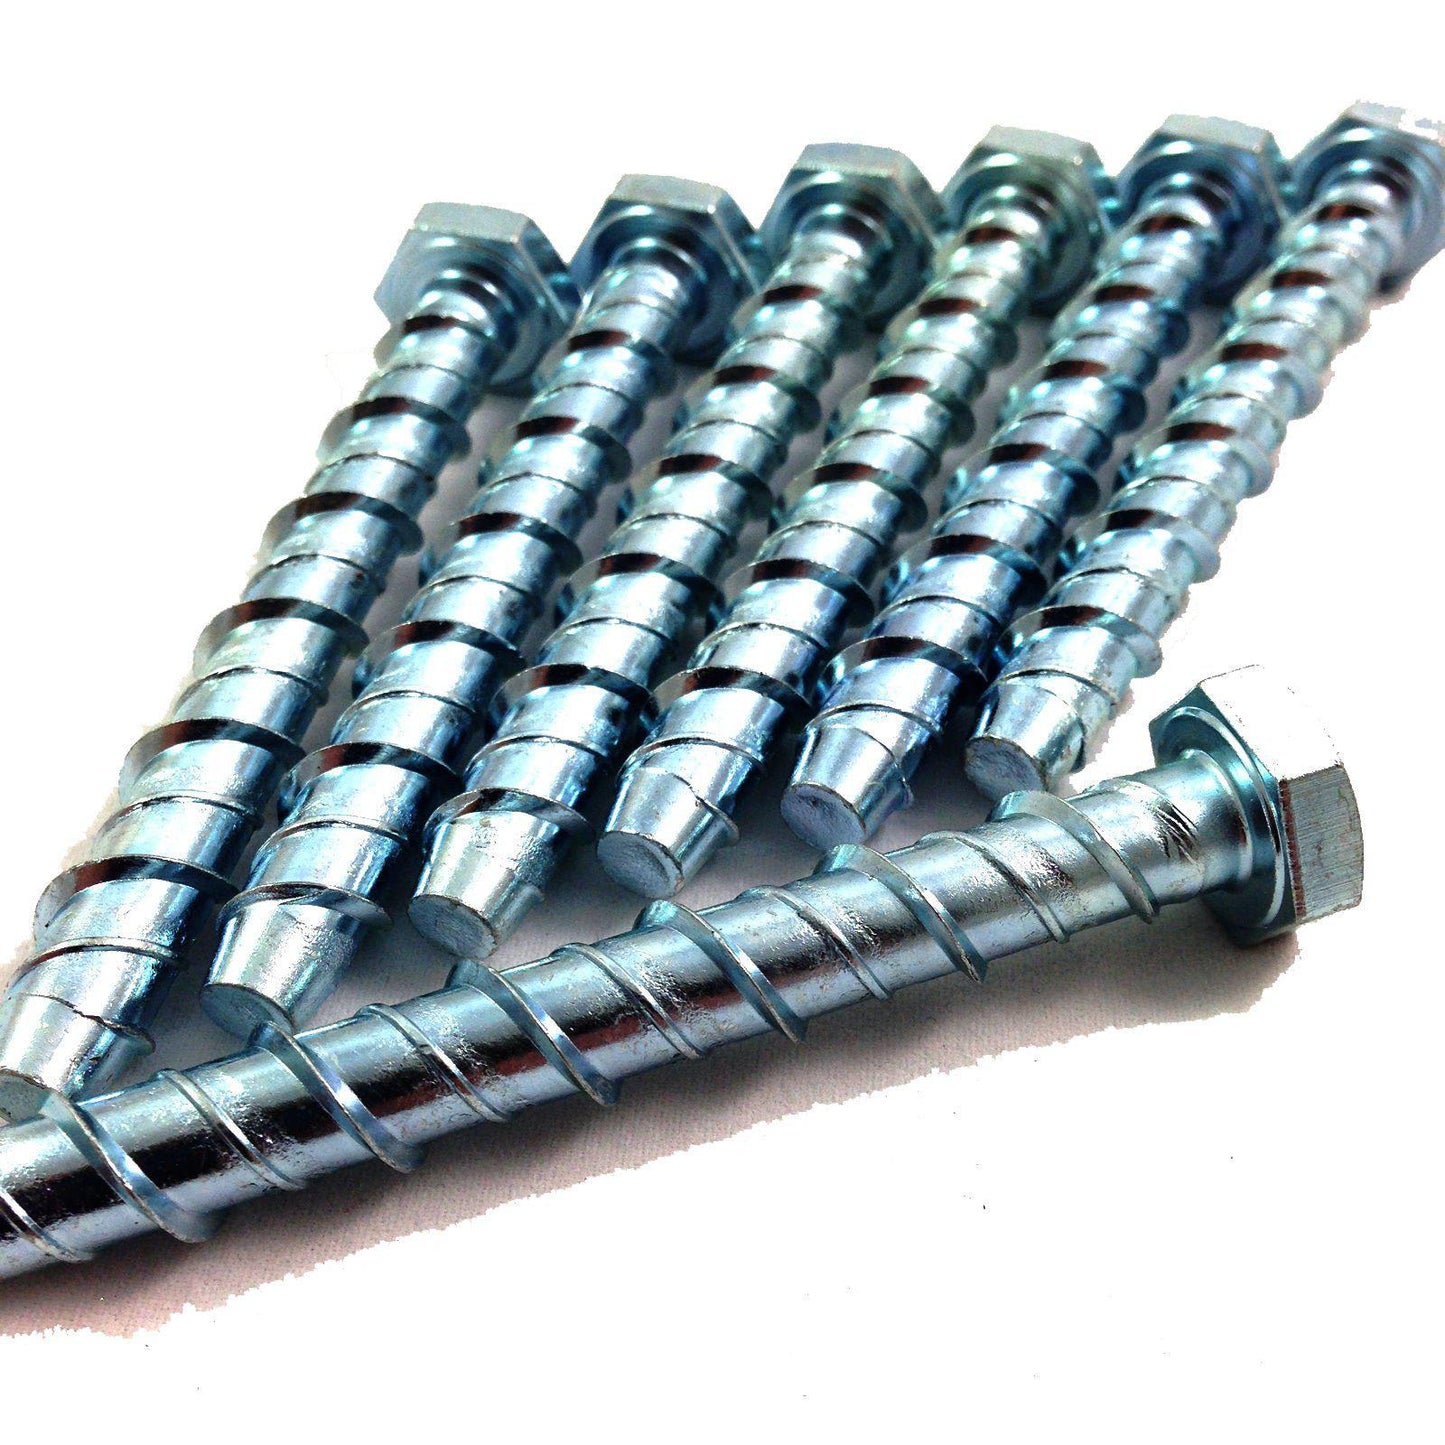 M10, Hex, Concrete Anchor Screw, Self-Tapping, High Tensile, Zinc. Masonry Anchor Fixings M10, Hex, Concrete Anchor Screw, Self-Tapping, High Tensile, Zinc. Concrete Screw - Hex - Heavy Duty